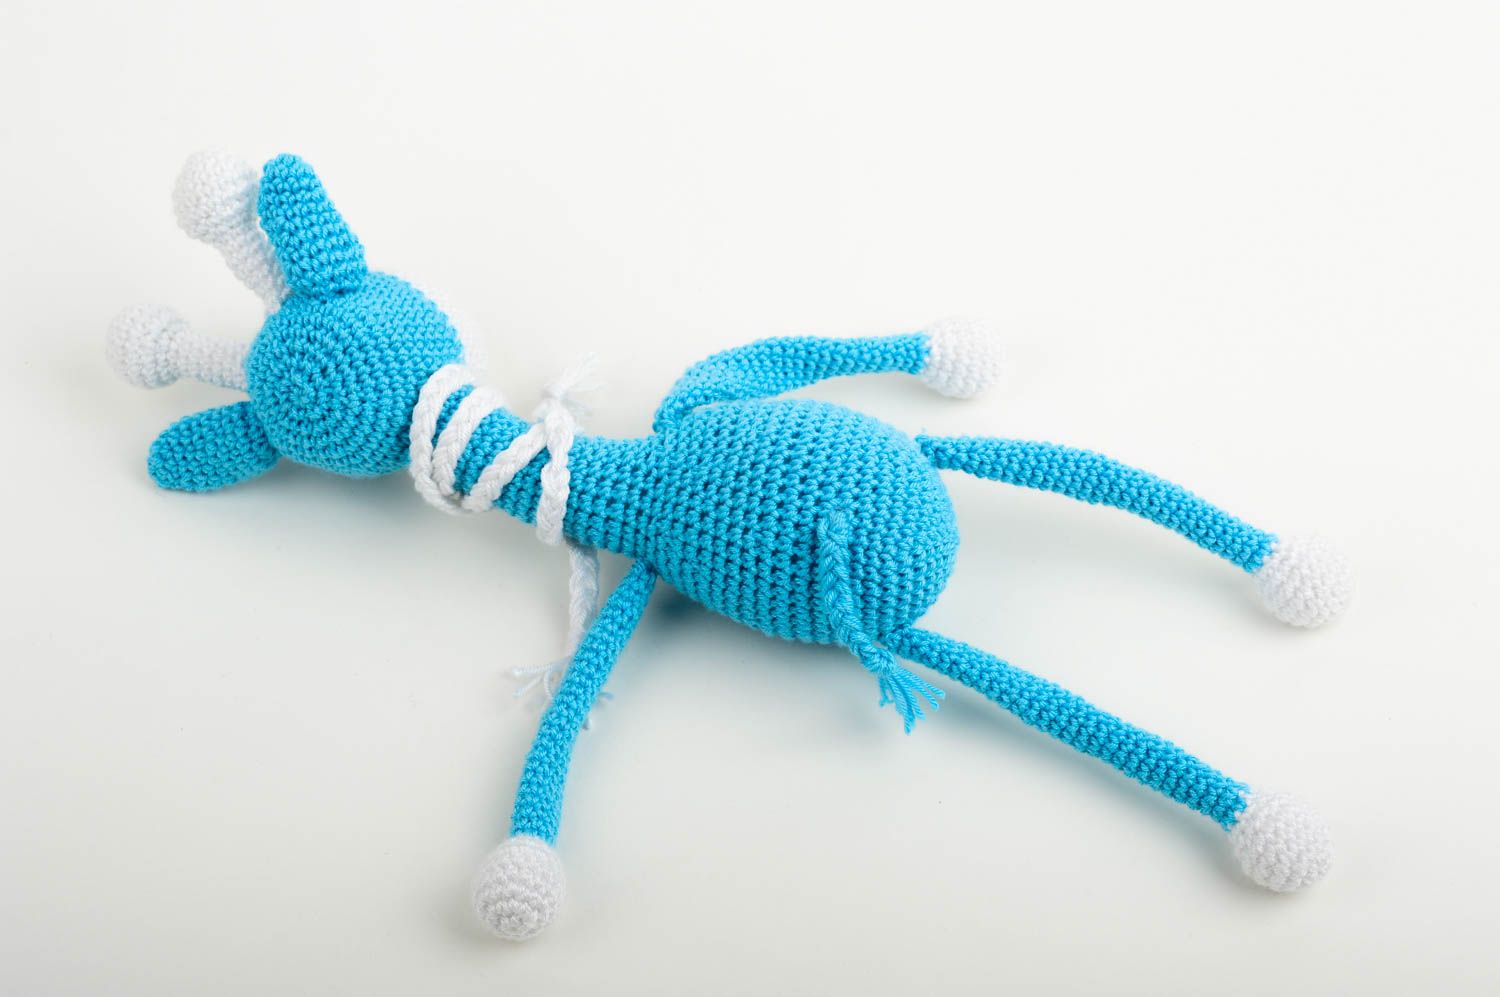 Handmade toy unusual toy for children crocheted toy gift ideas home decor photo 5